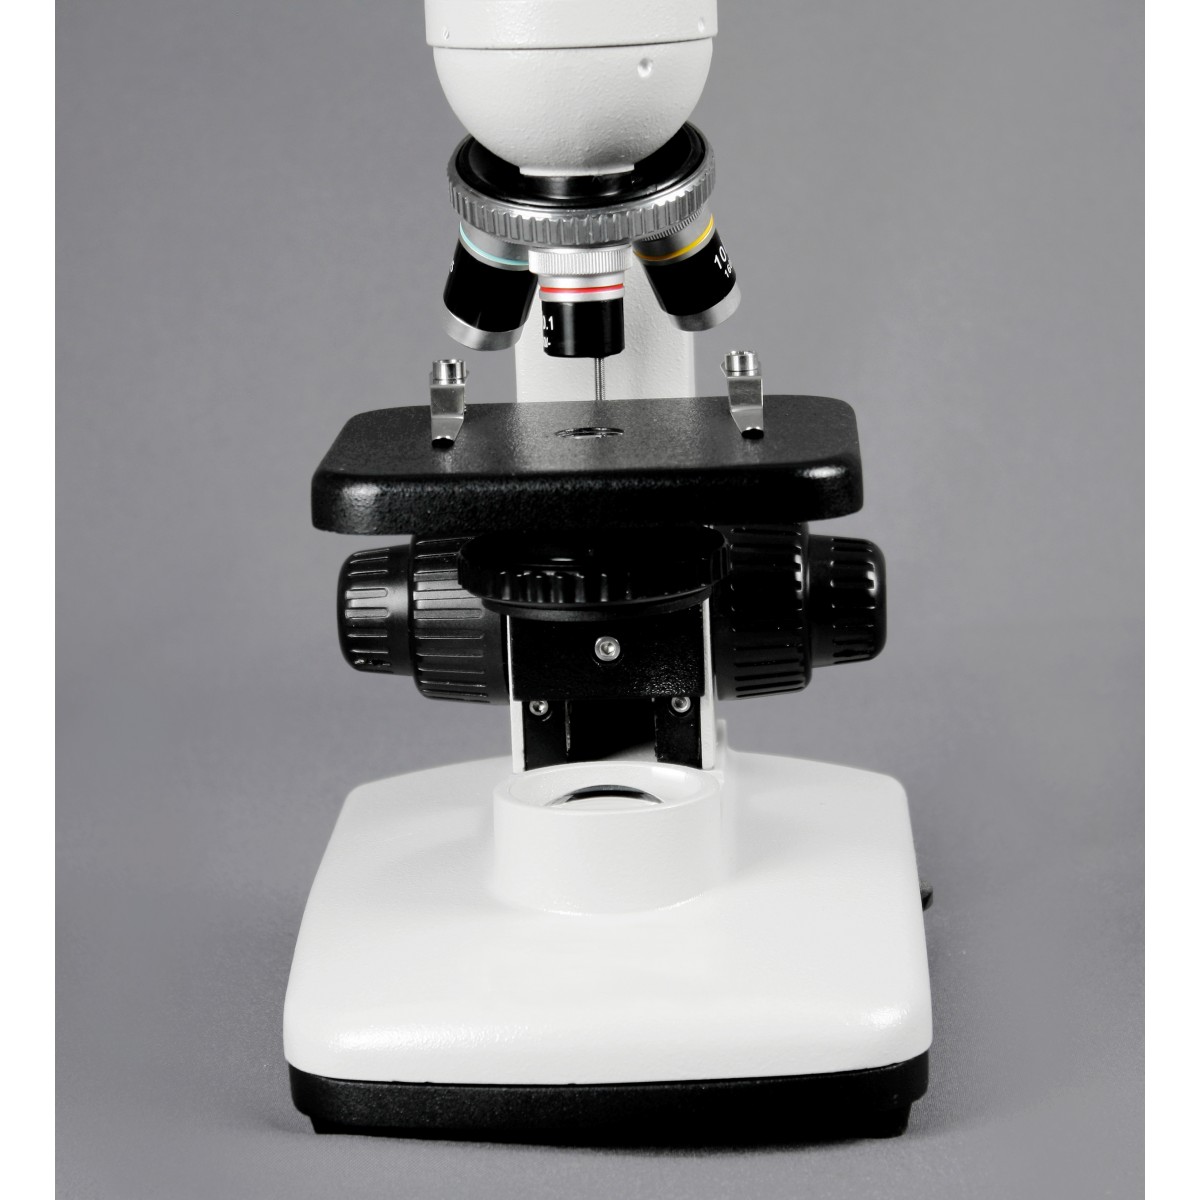 Vision Scientific VME0020-E3-MS2 Student LED Microscope 40x-1000x Magnification 10x WF and 25x WF Eyepiece Coarse and Fine Focus LED Illumination with Light Intensity Control Mechanical Stage 